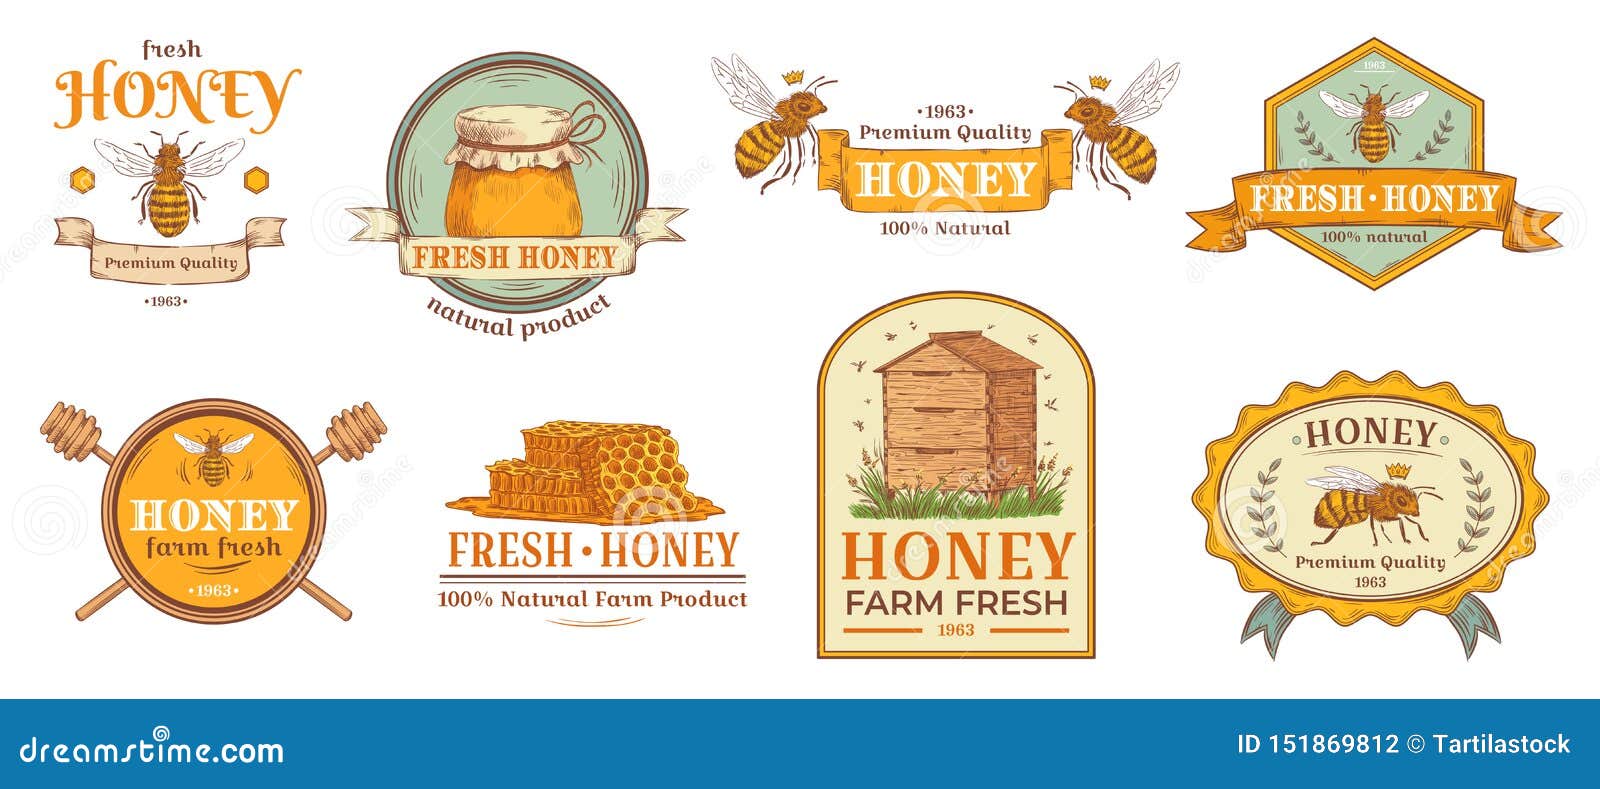 honey badge. natural bee farm product label, organic beekeeping pollen and bees hive emblem badges  